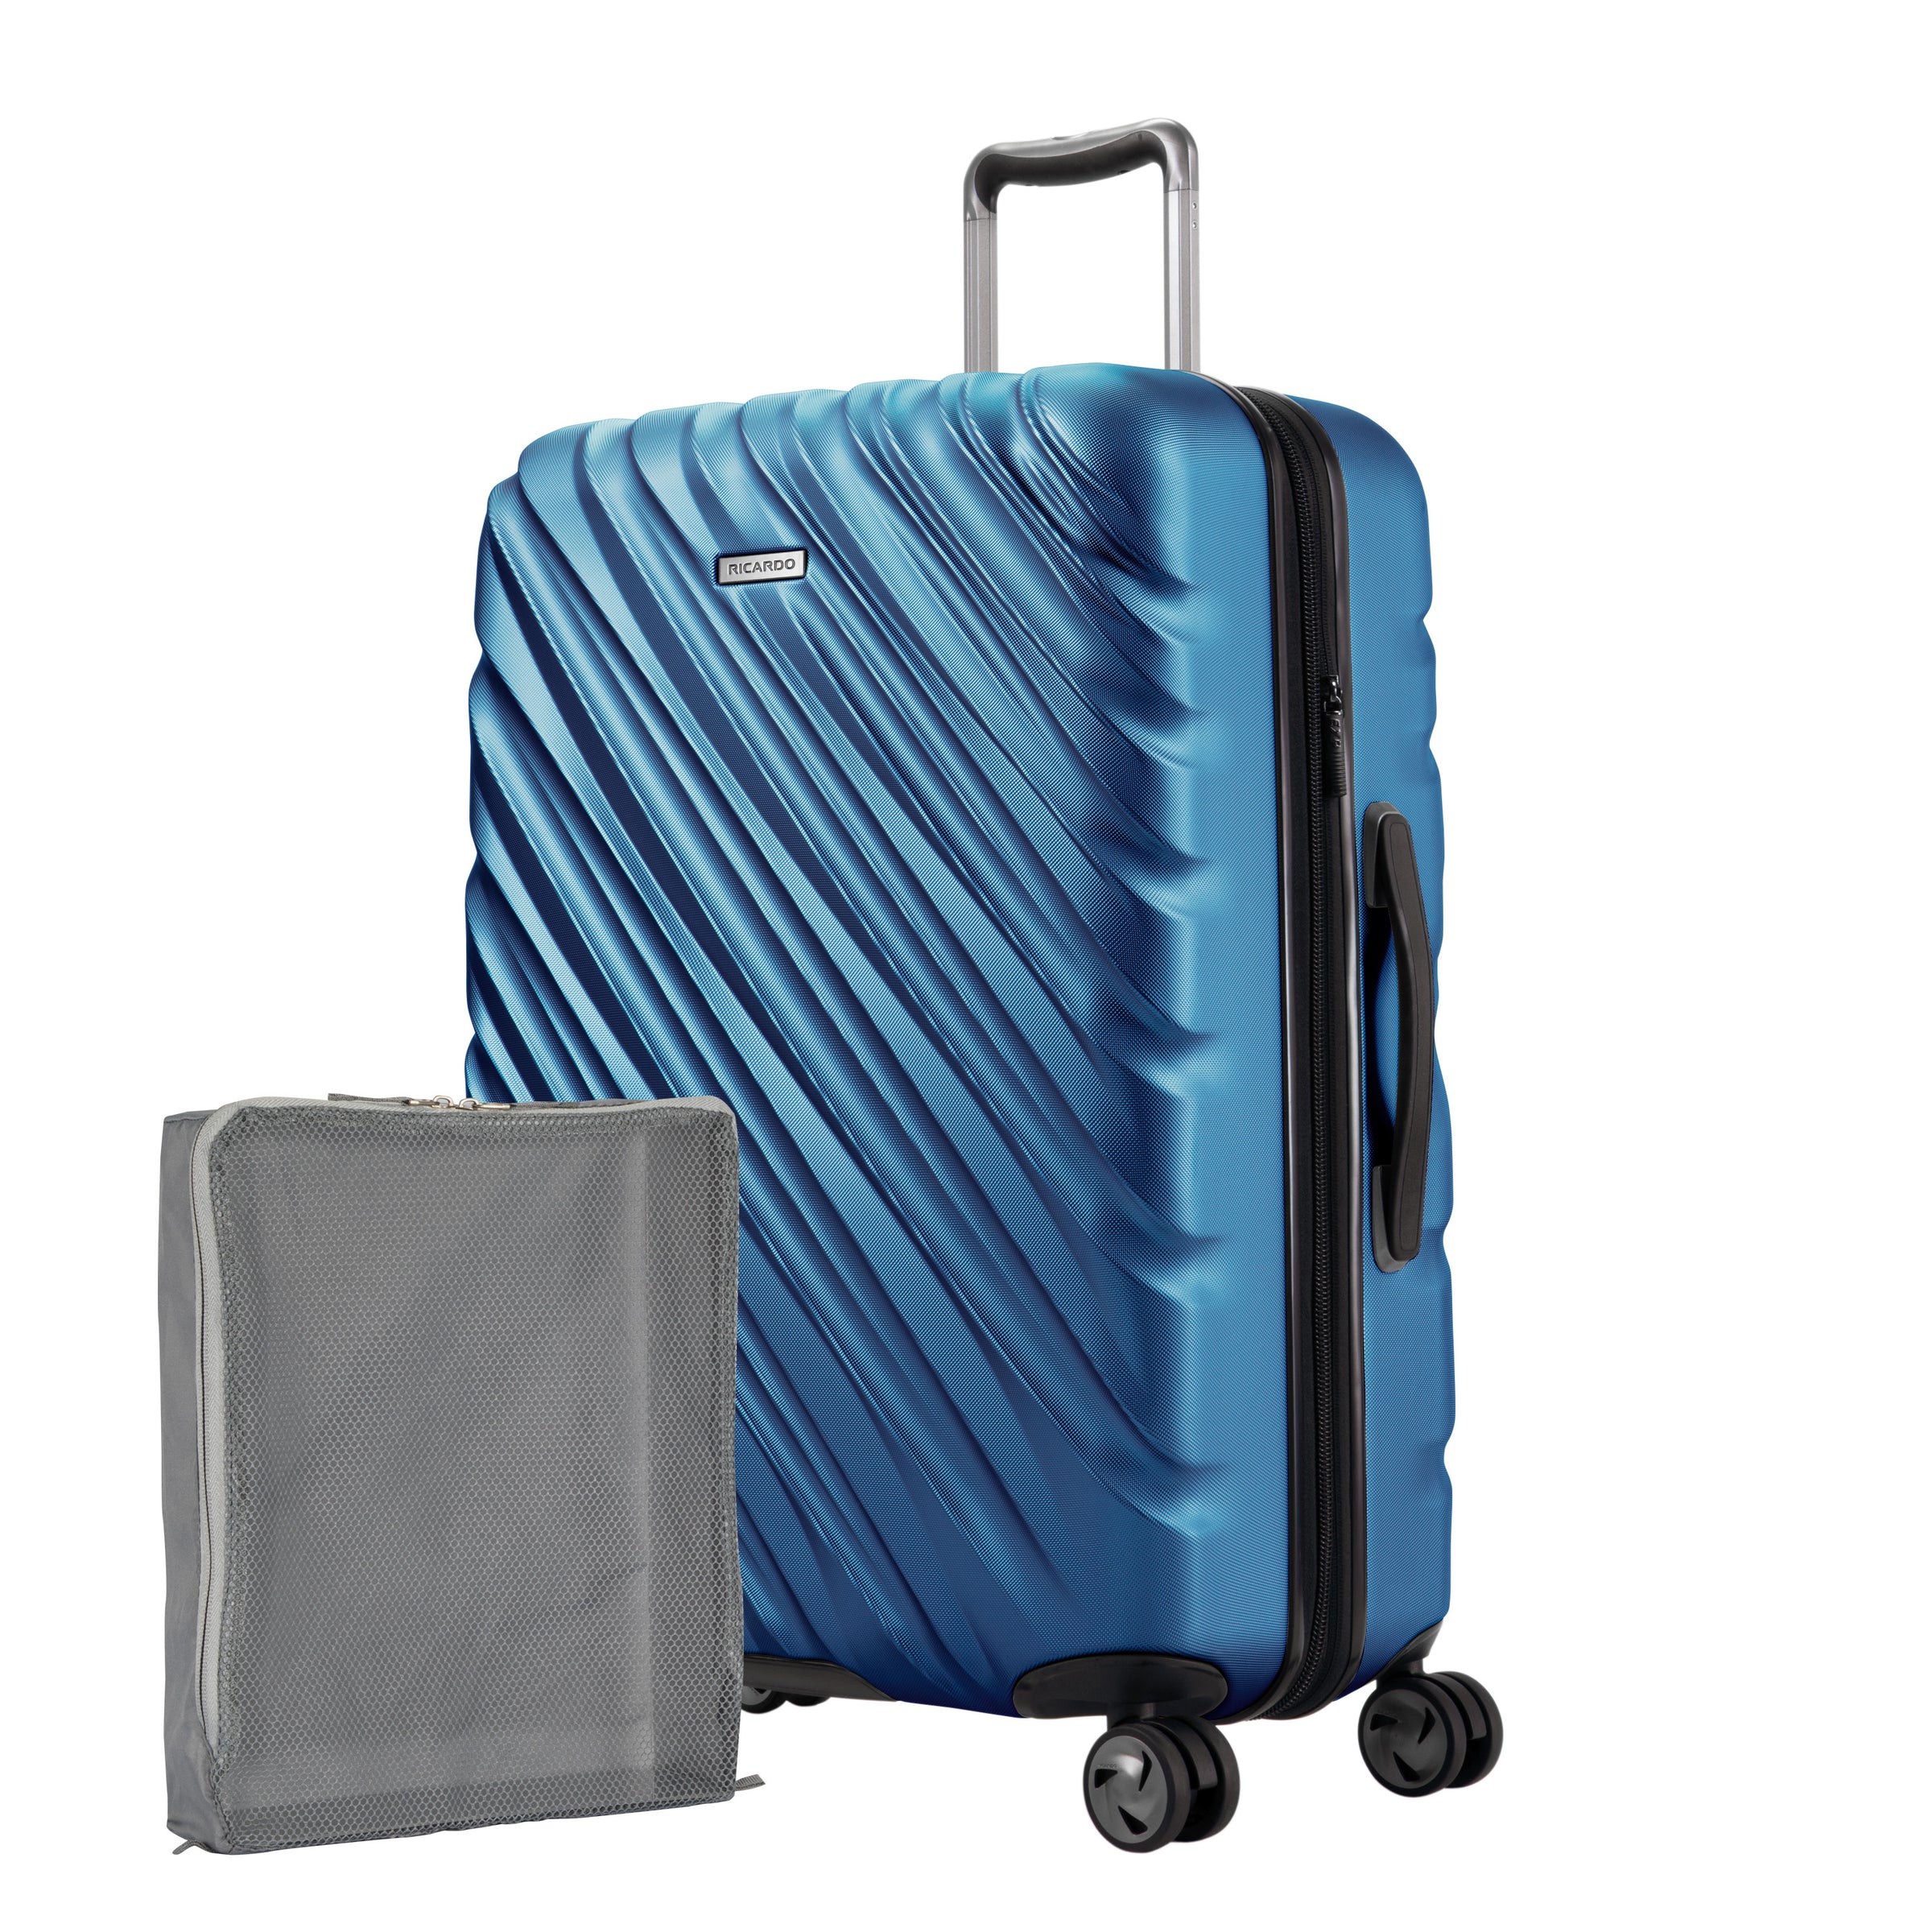 Twilight Blue Ricardo Mojave check-in hardside suitcase with diagonal grooves shown with a large grey packing cube